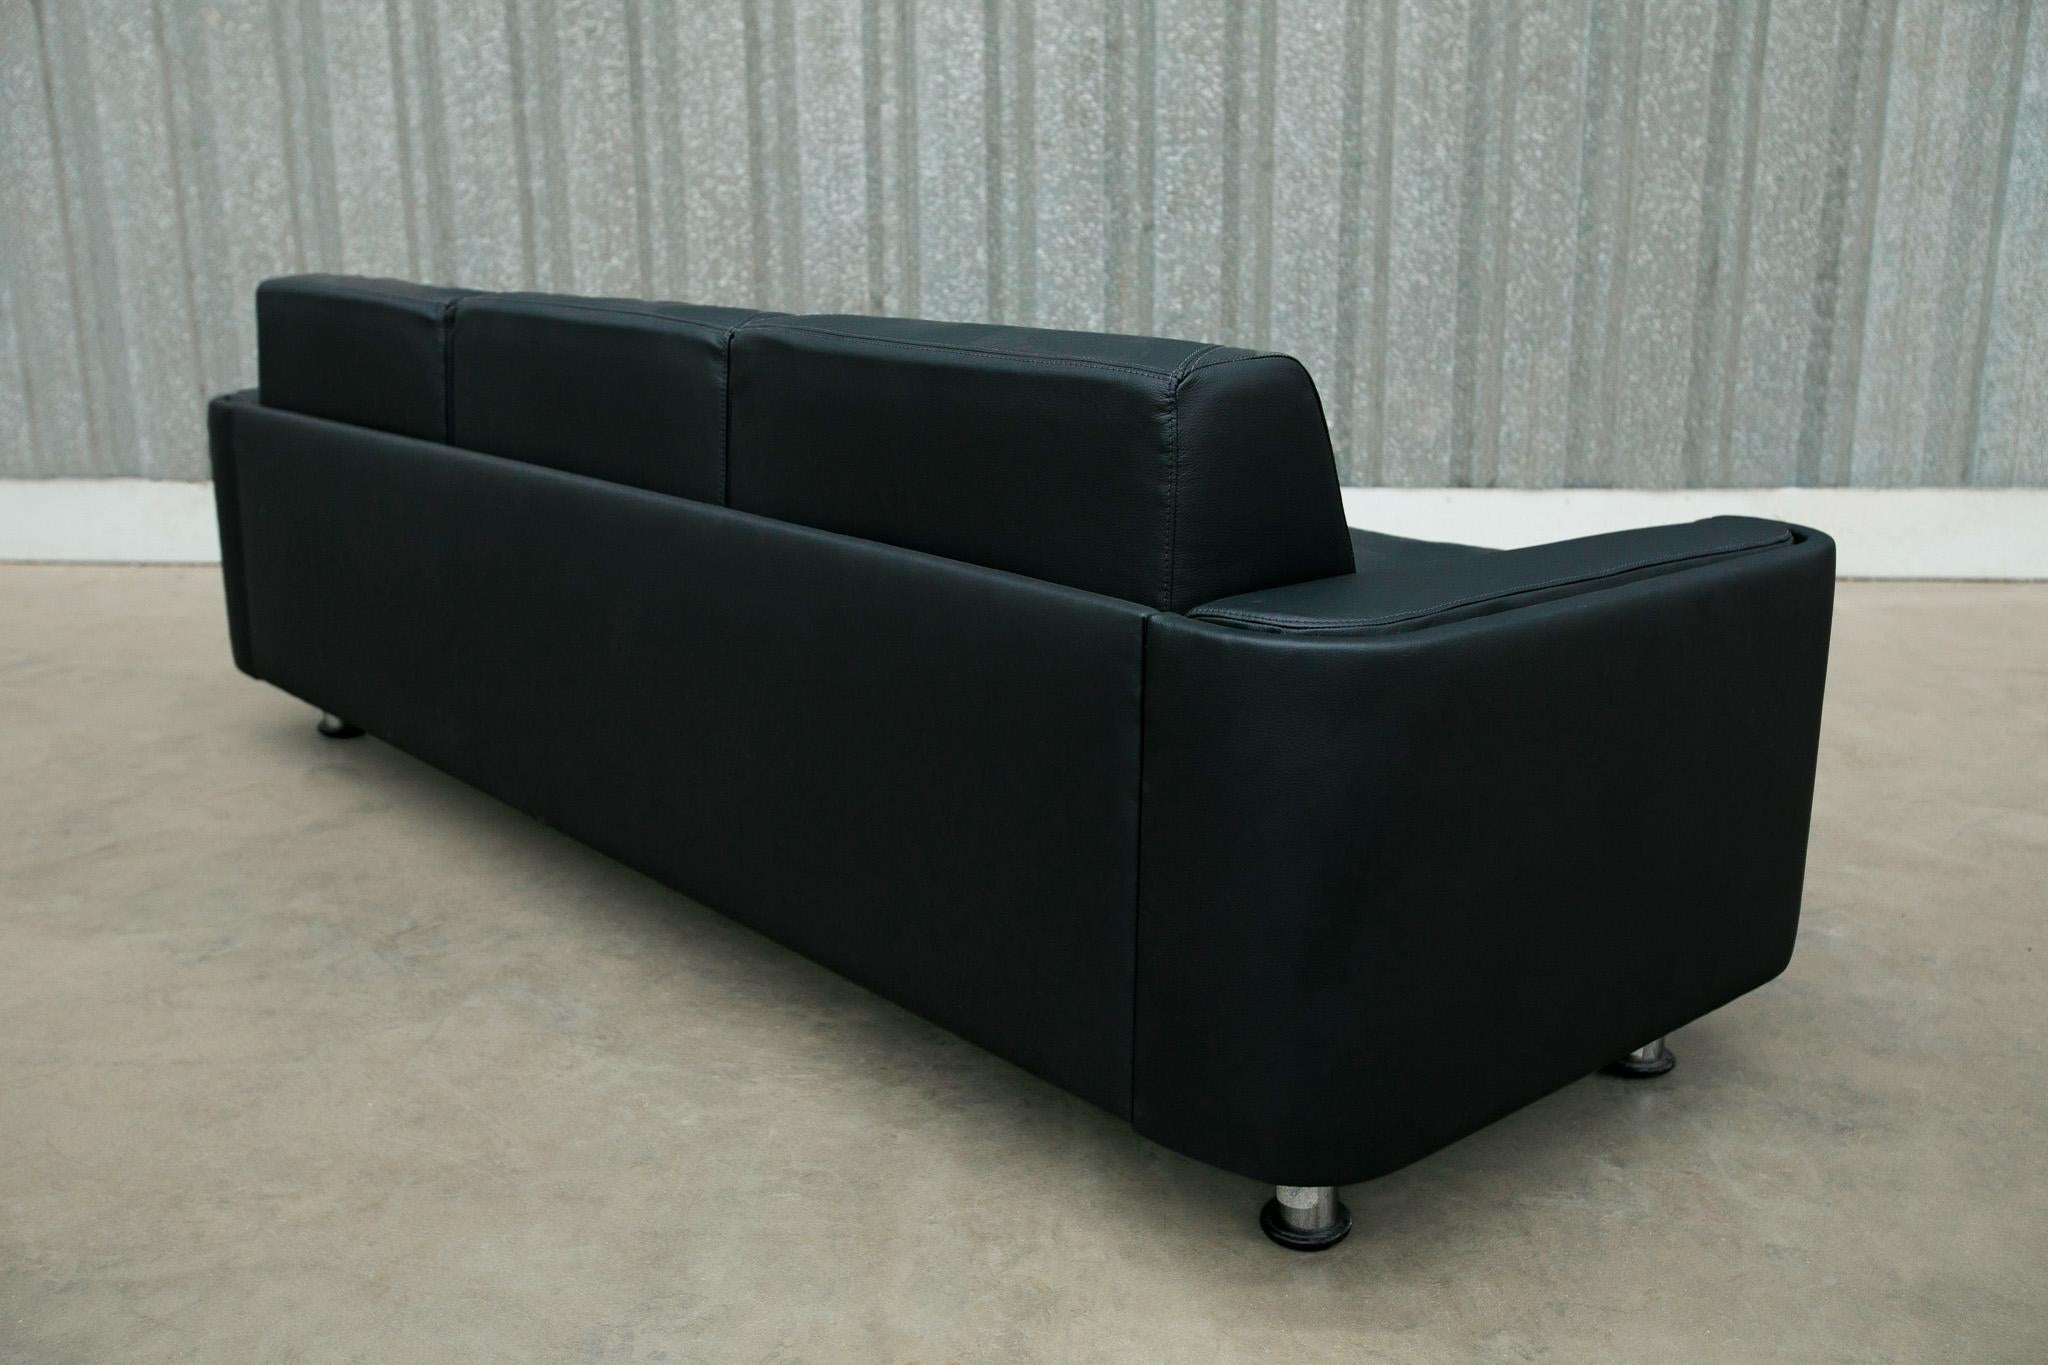 Hand-Knotted Mid-Century Modern Sofa in Black Leather & Wood by Jorge Zalszupin, Brazil, 1970 For Sale